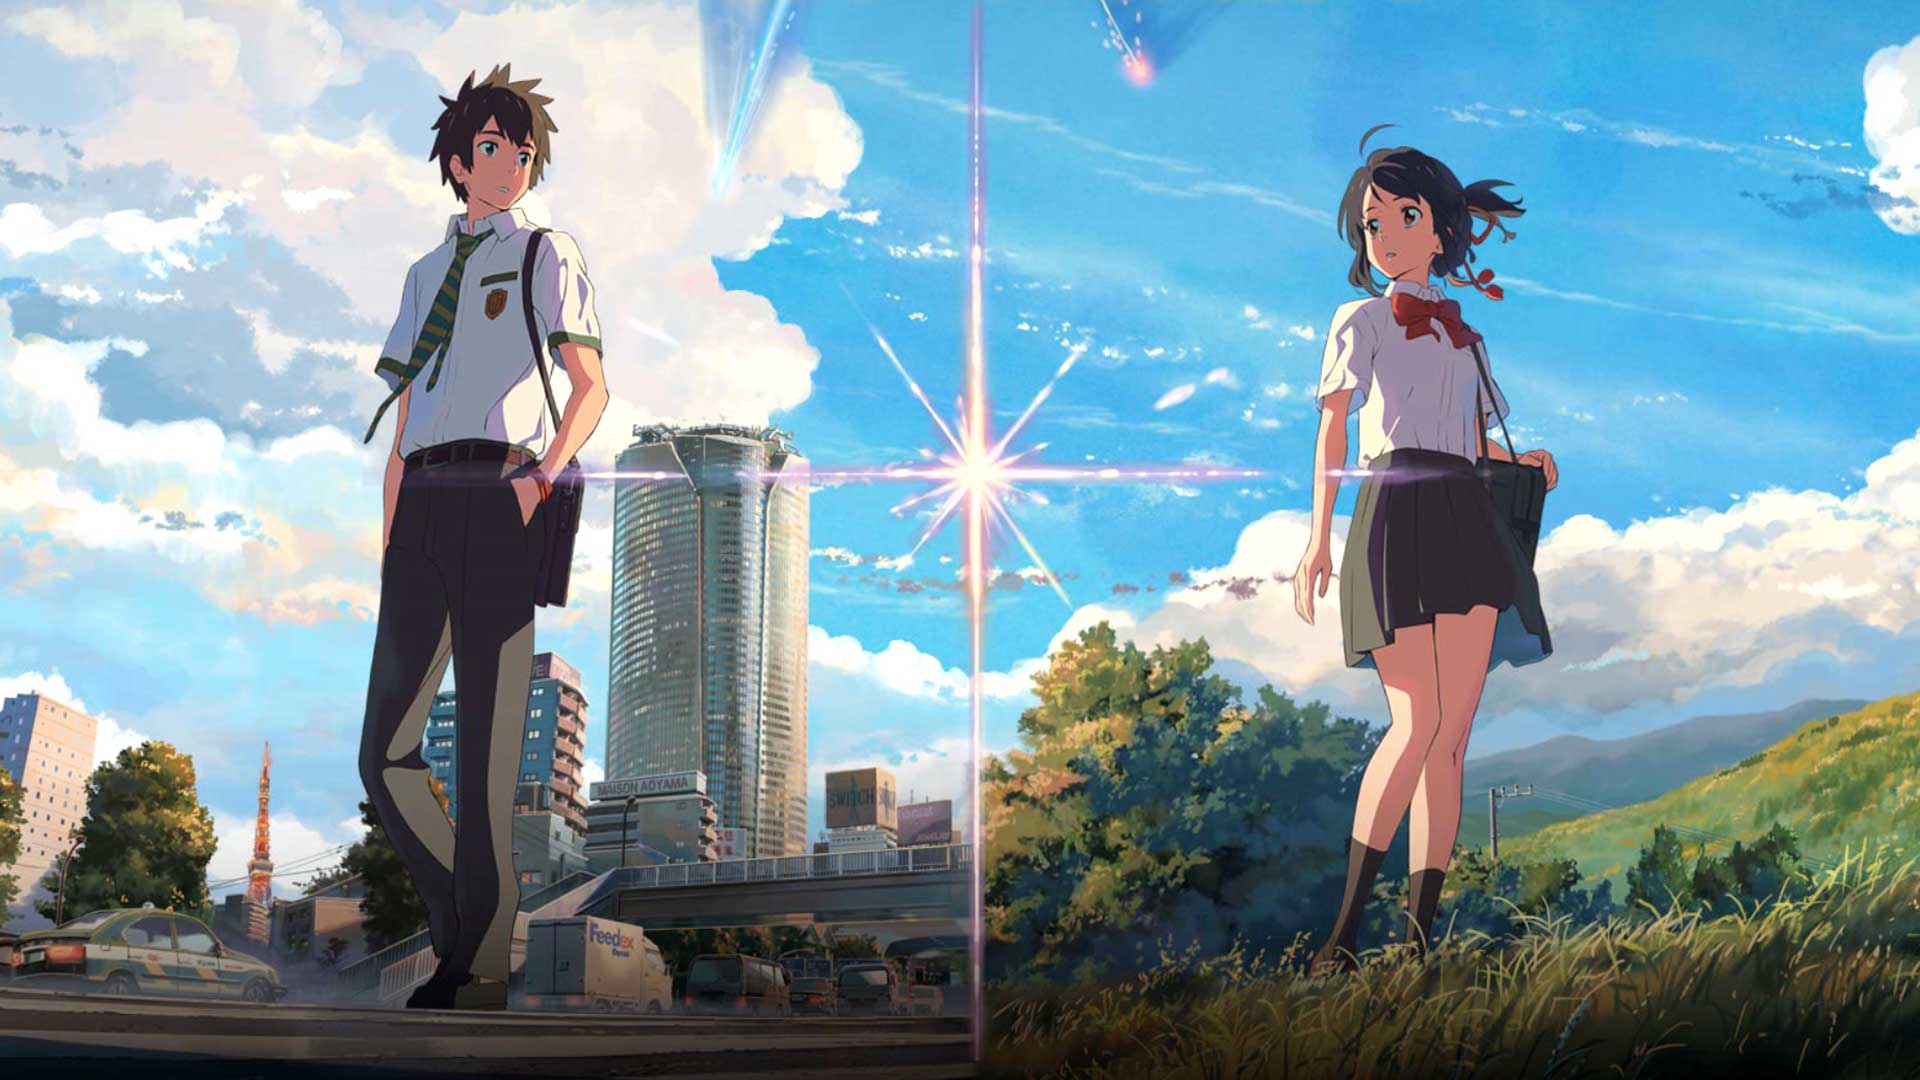 Your Name Anime Hd Wallpapers Wallpaper Cave